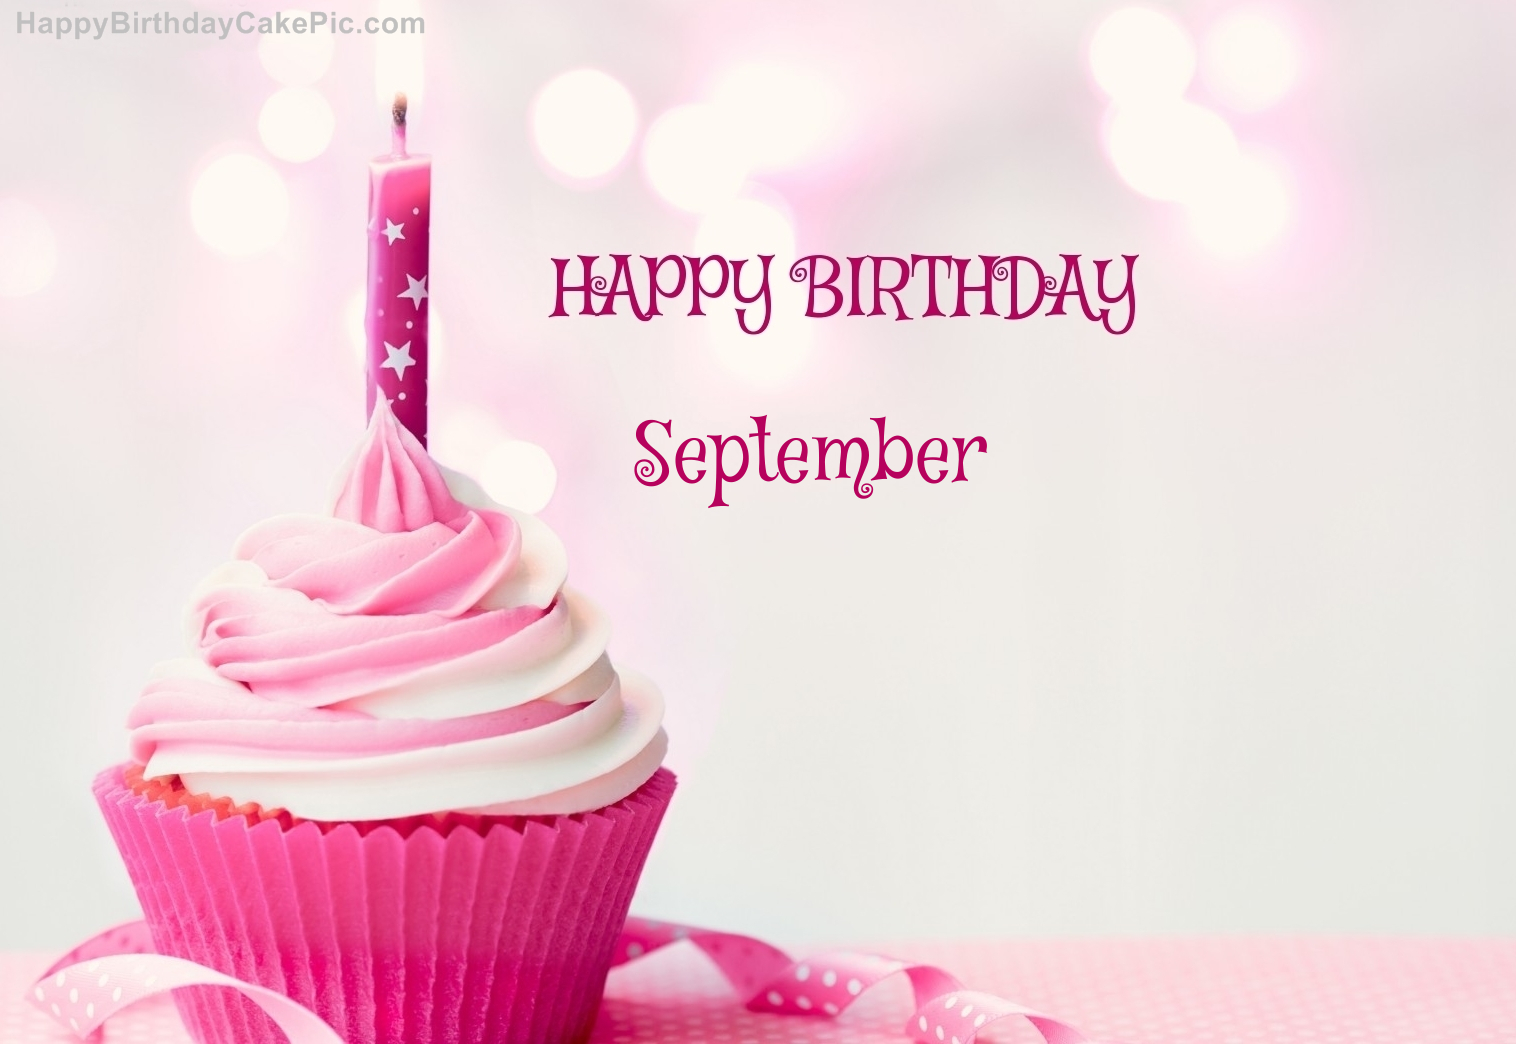 http://happybirthdaycakepic.com/September/7/happy-birthday-cupcake-candle-pink-picture